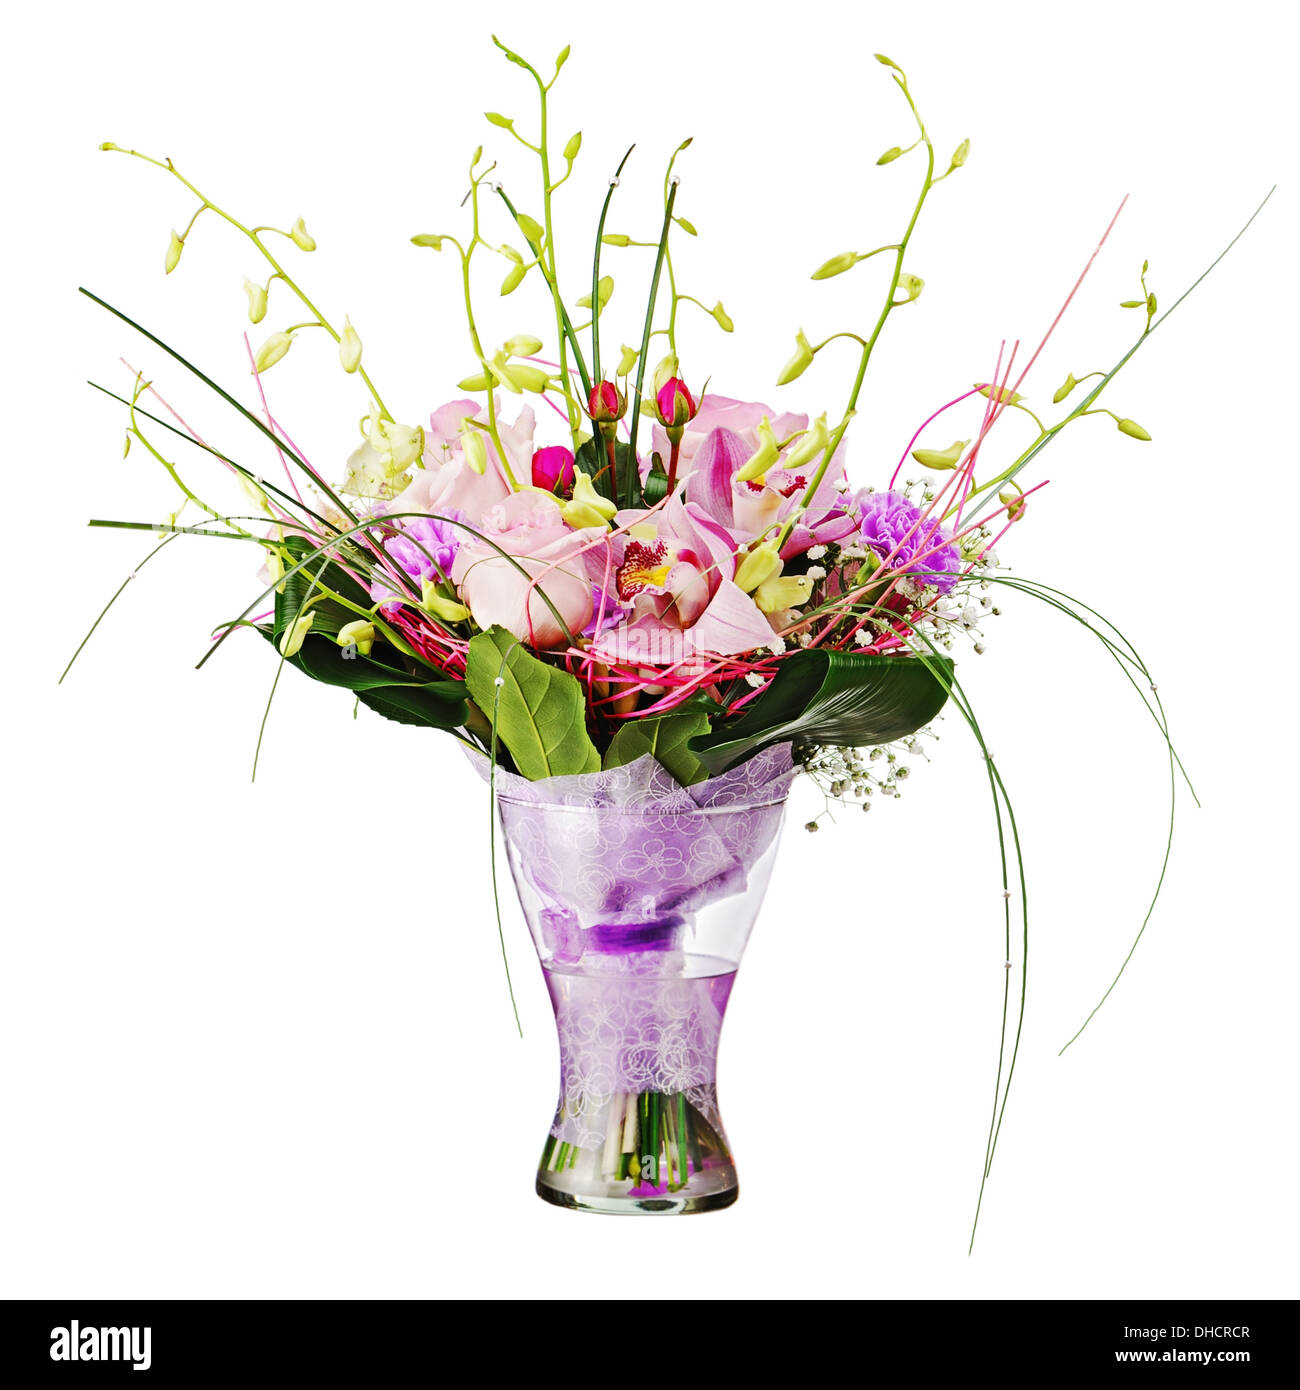 Colorful flower bouquet in vase isolated on white background. Closeup. Stock Photo